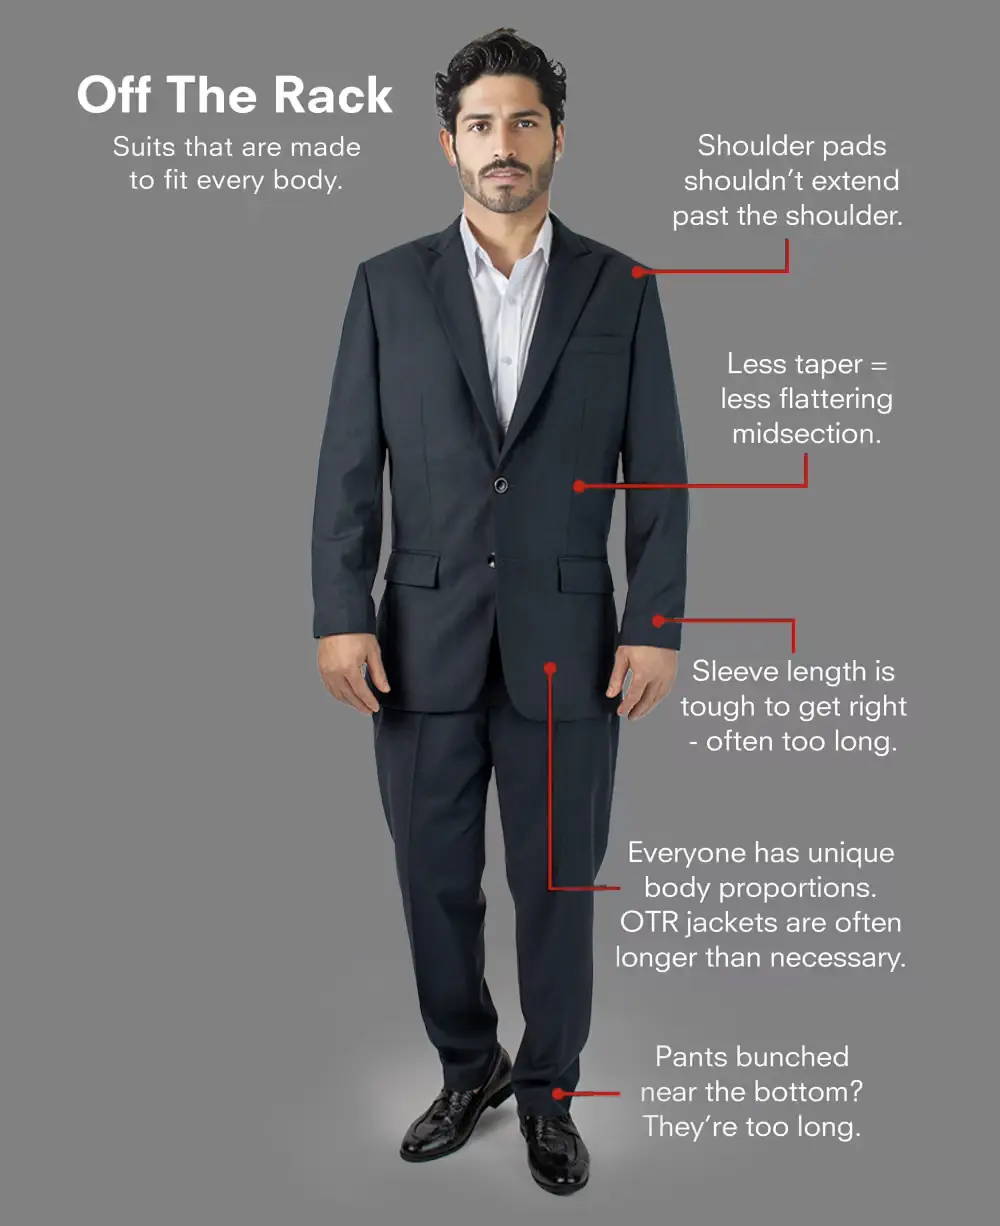 Off-The-Rack suit that doesn't fit well on a model